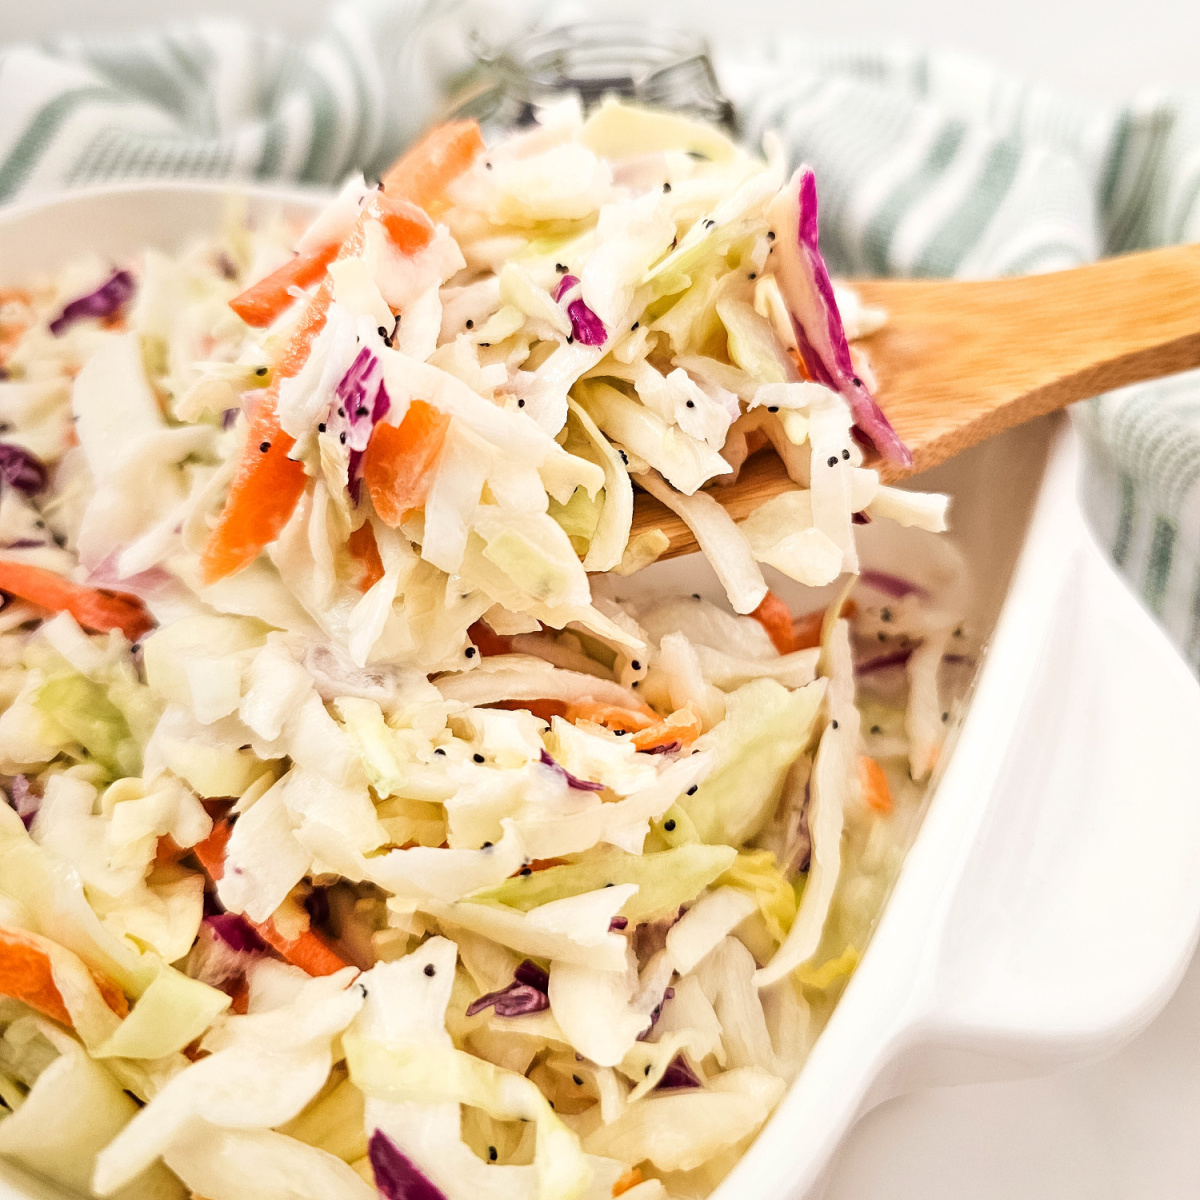 Creamy Coleslaw with Poppy Seed Dressing